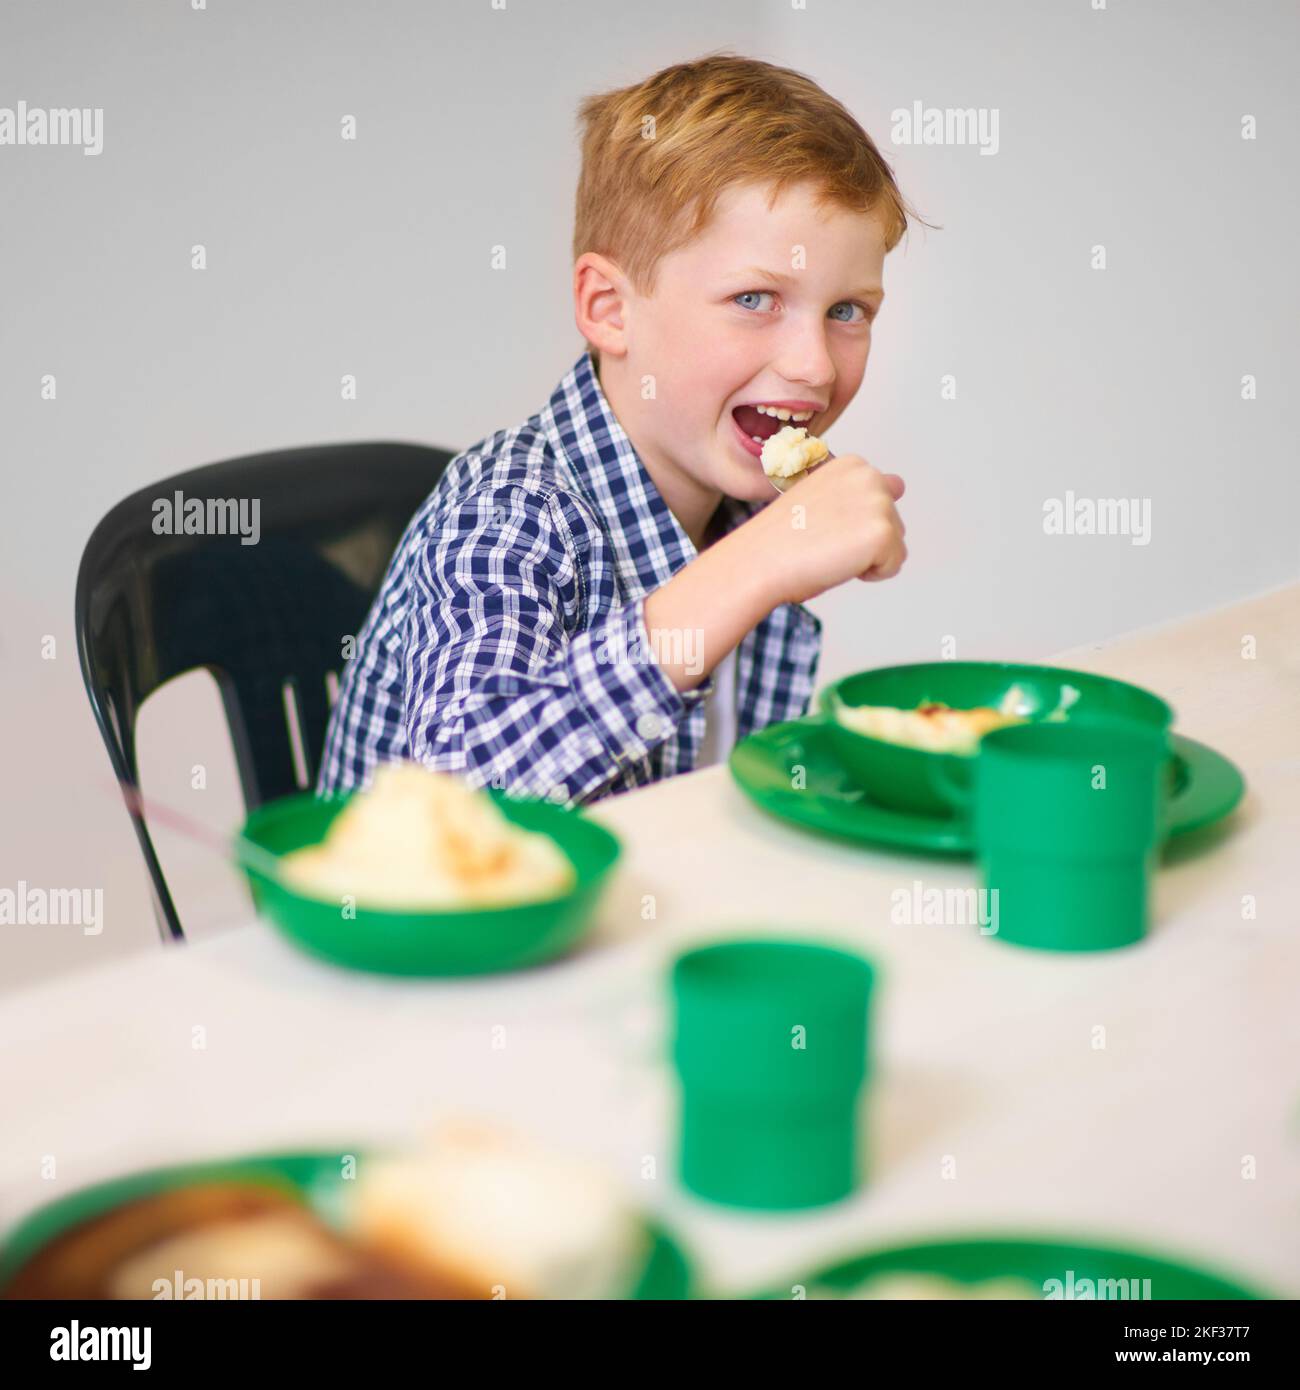 Hes got quite the appetite. Portrait of a young boy eating at a volunteer run kitchen. Stock Photo